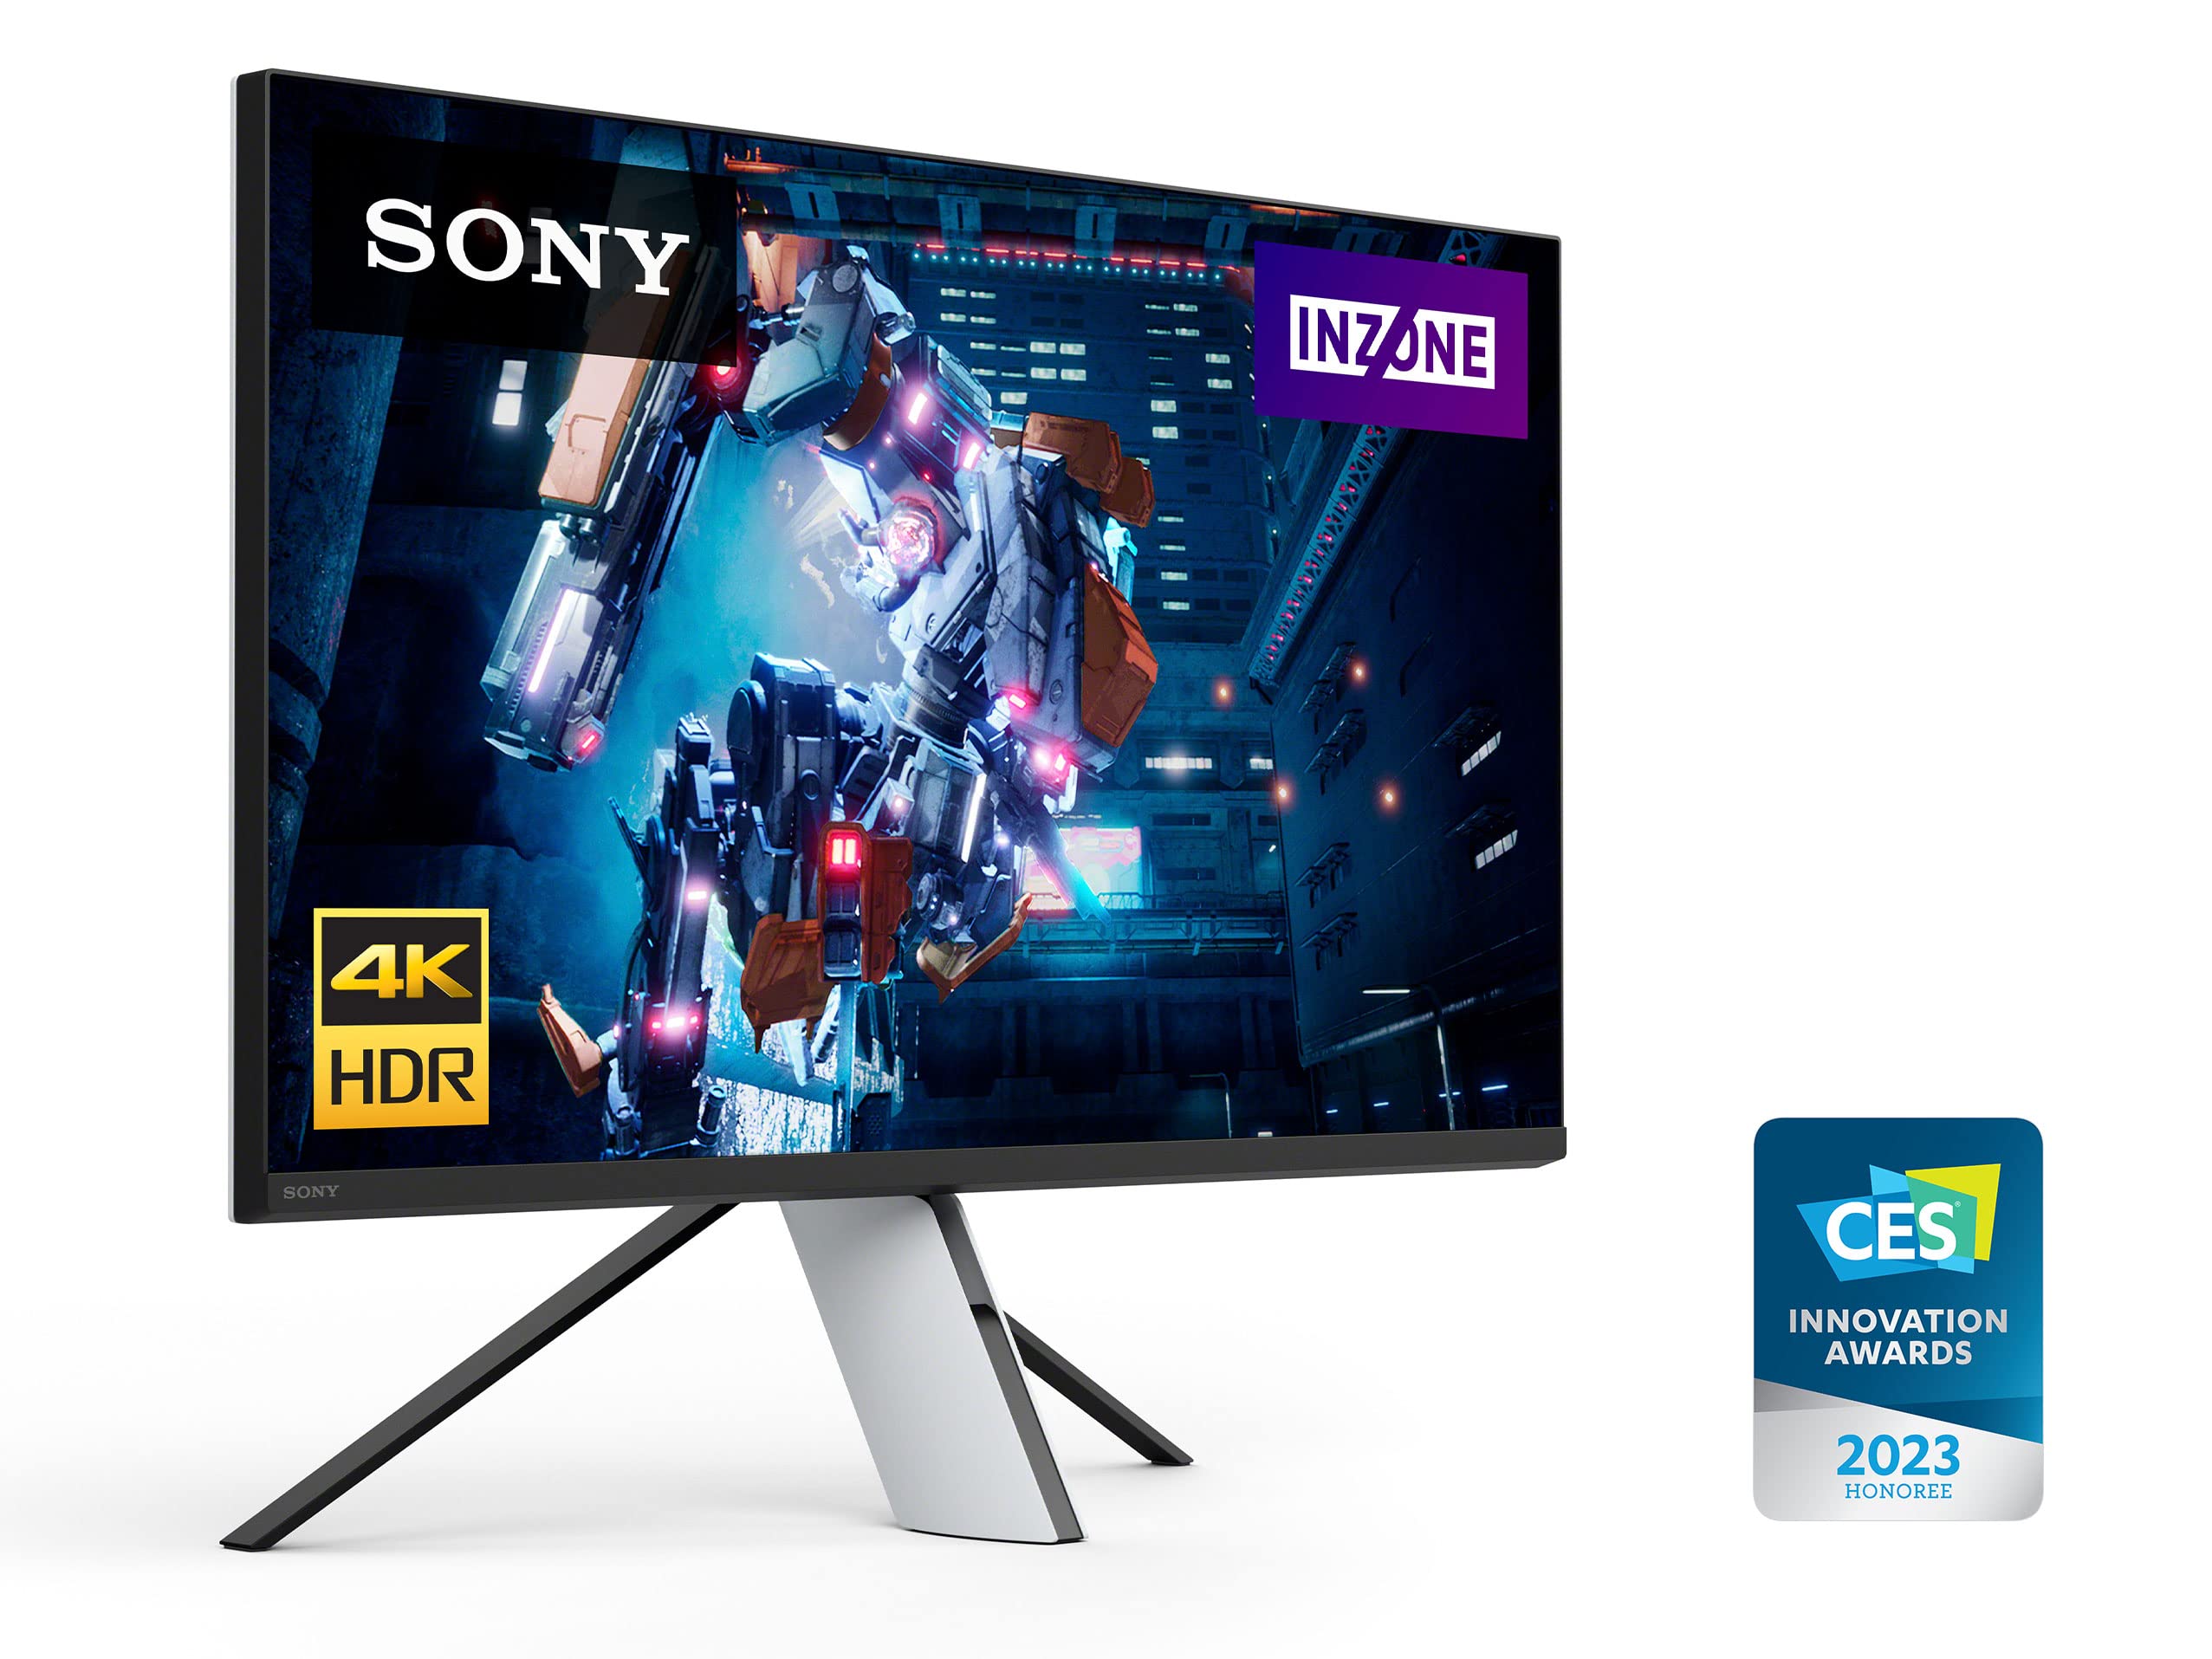 Sony 27” INZONE M9 4K HDR 144Hz HDMI 2.1 Gaming Monitor with Full Array Local Dimming and NVIDIA G-SYNC (2022)